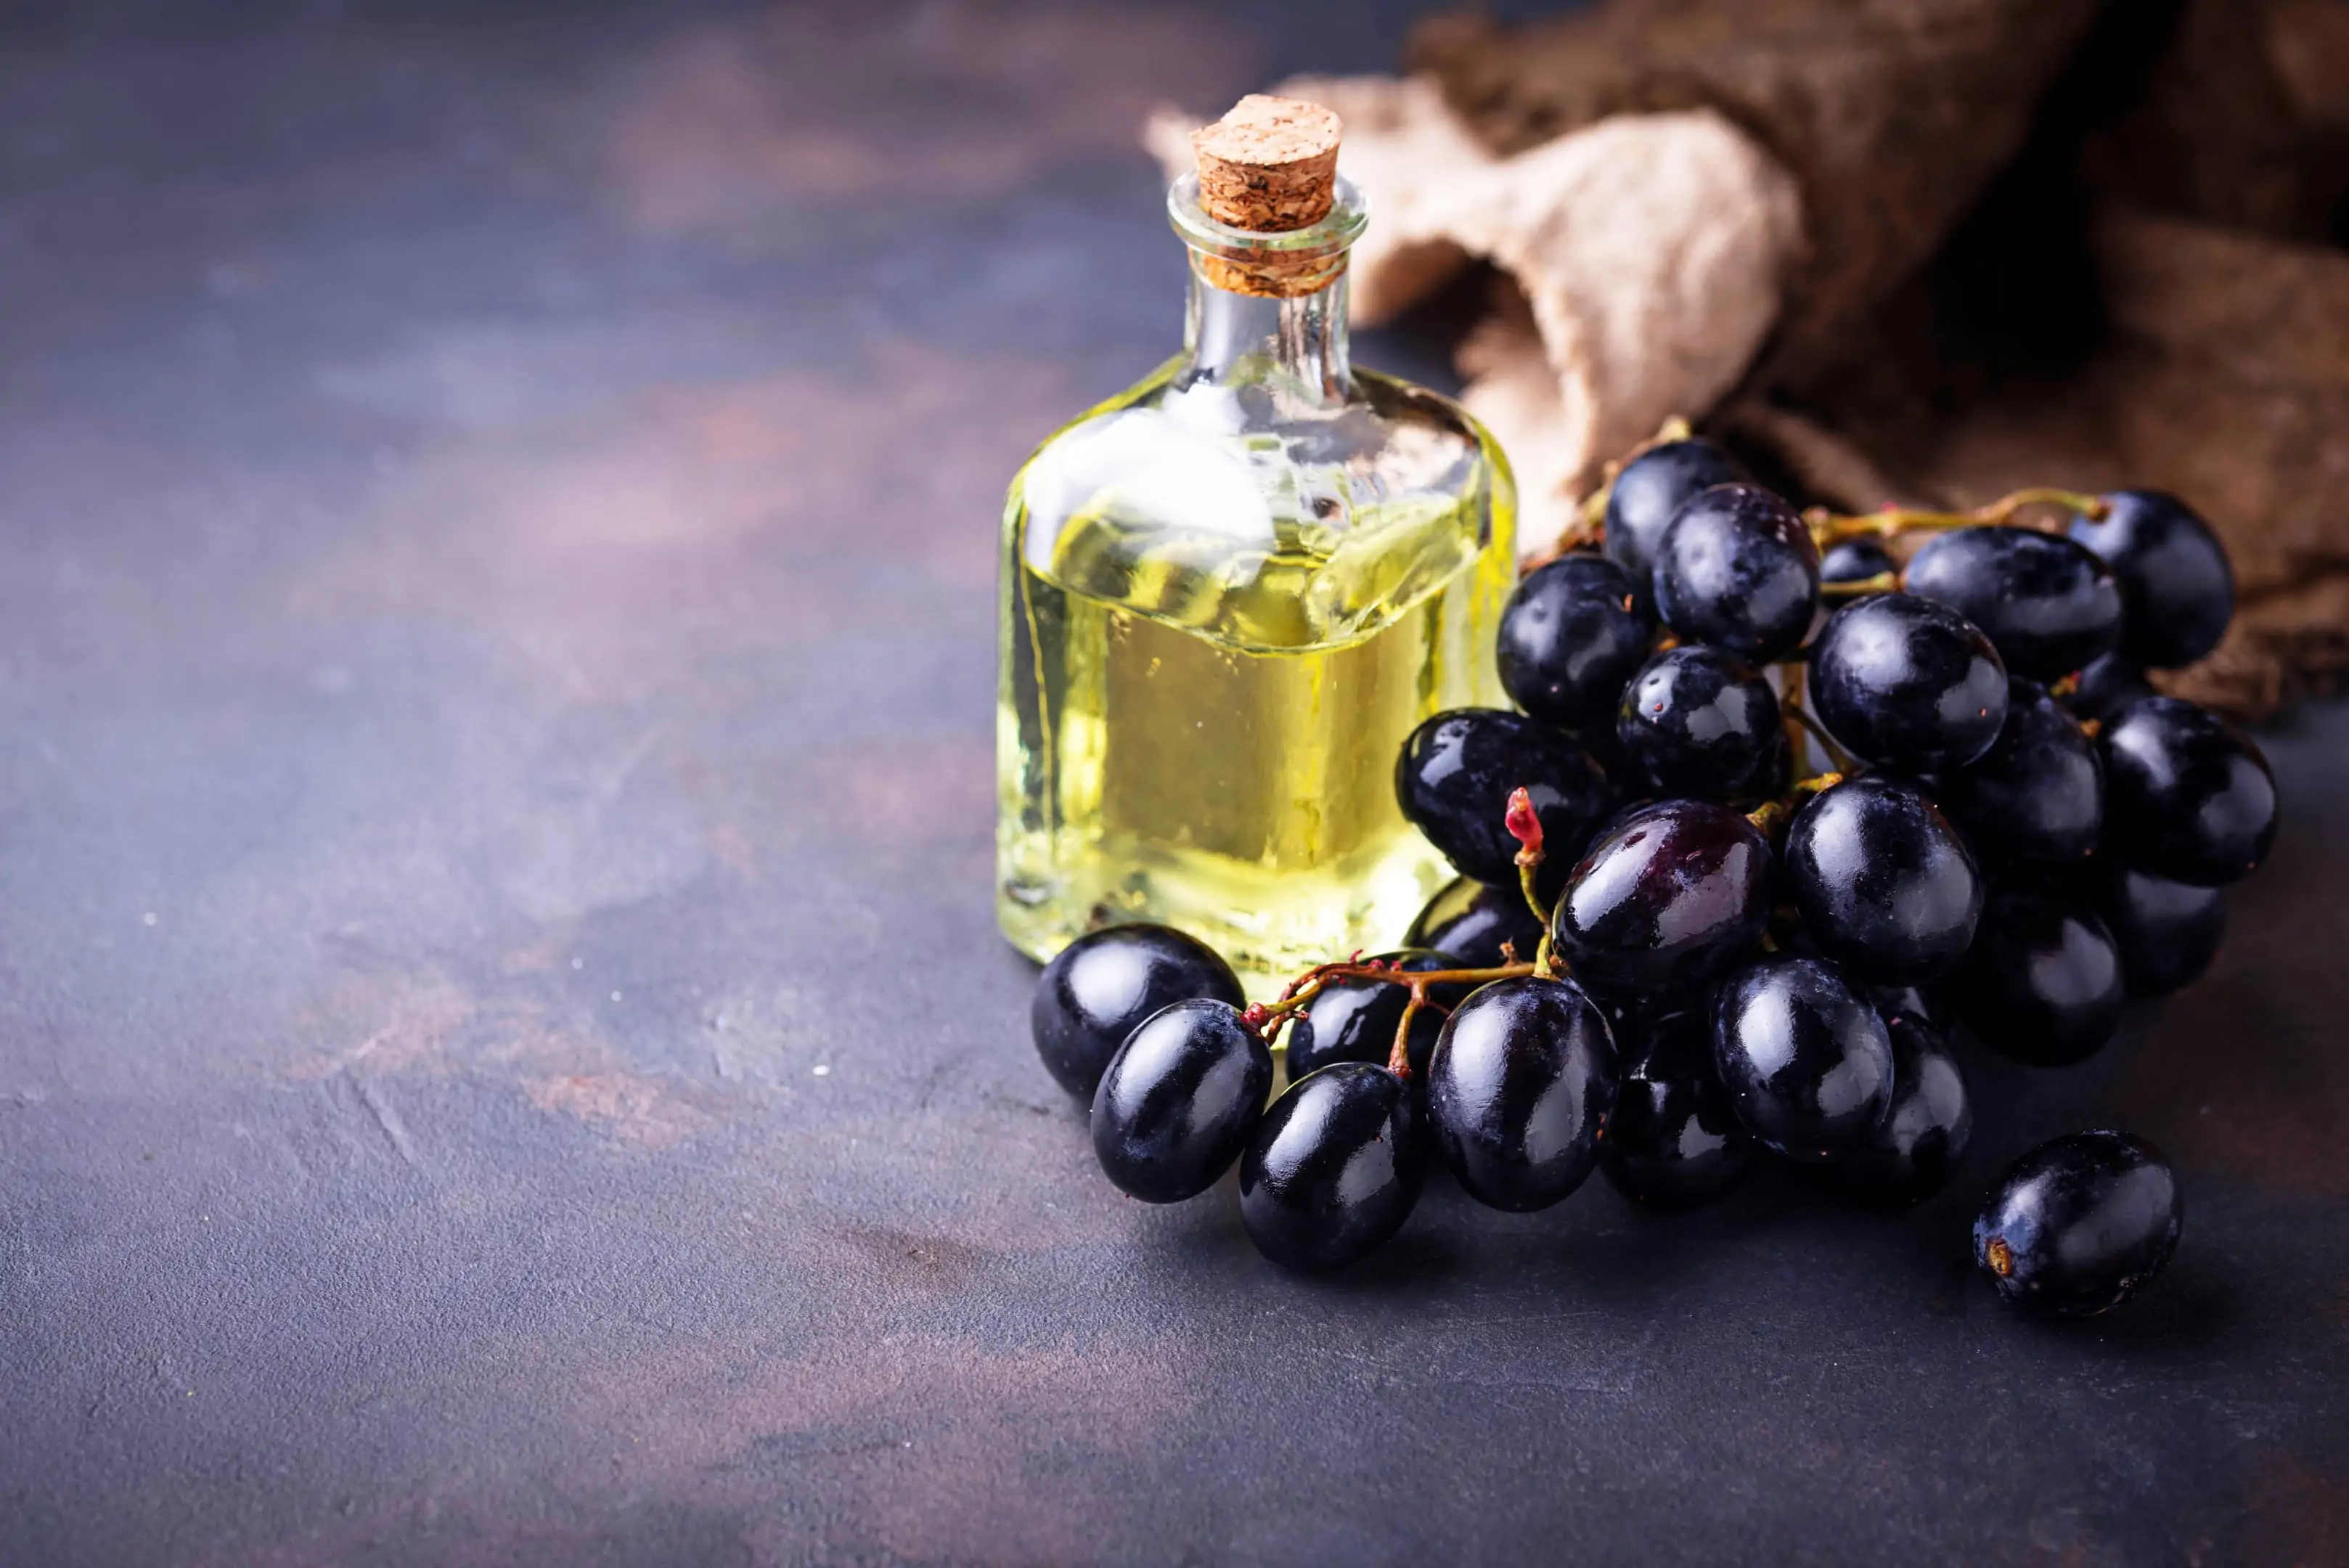 Grape seed extract in a small glass bottle with fresh grapes